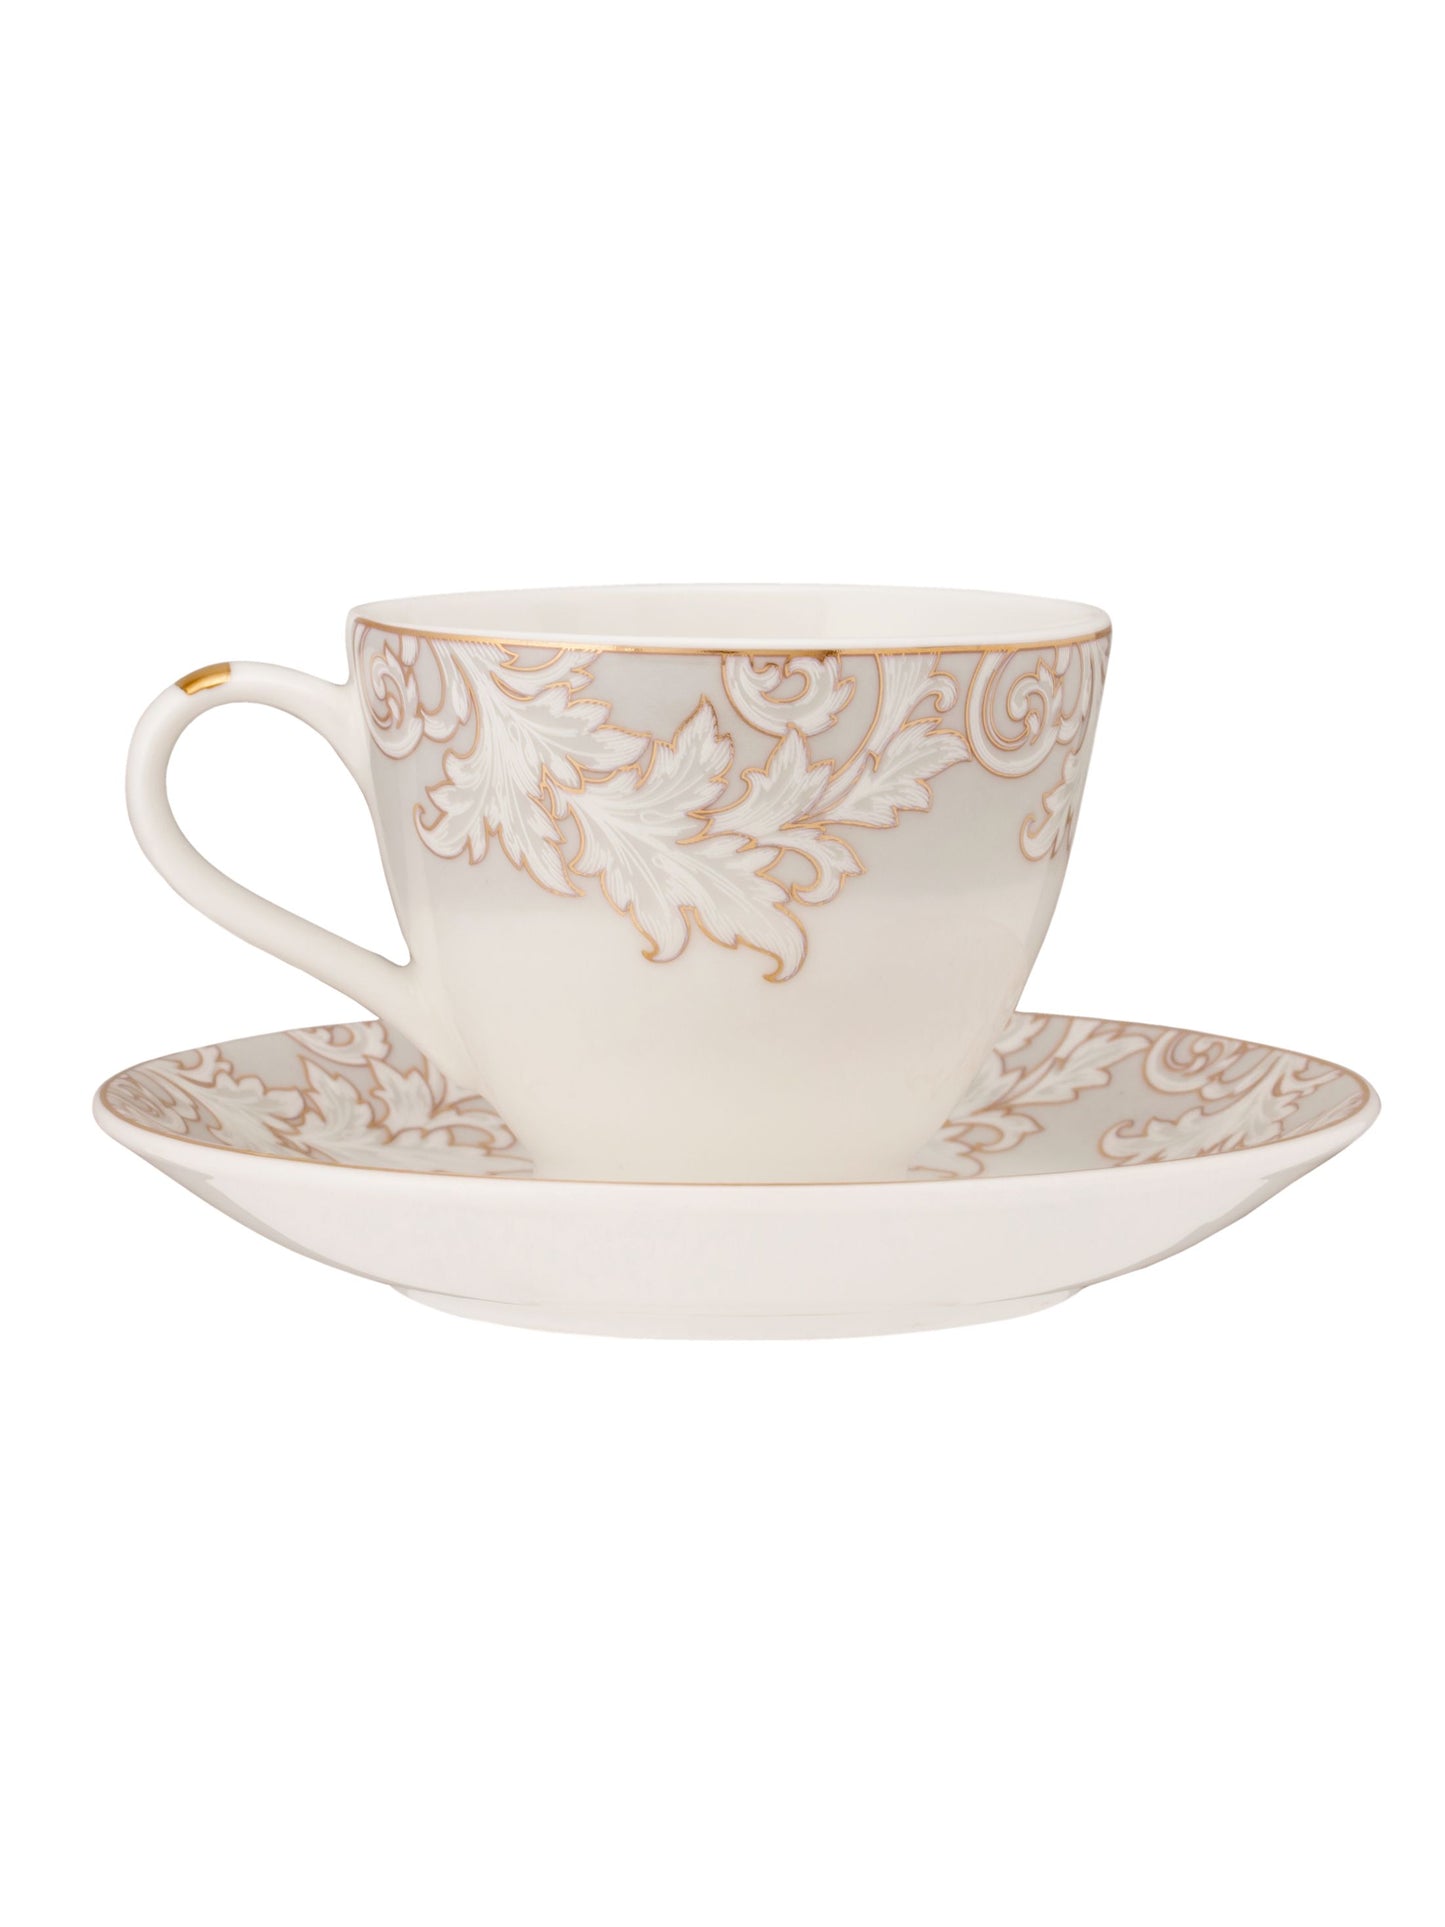 JCPL King Crysta Cup & Saucer, 160ml, Set of 12 (6 Cups + 6 Saucers) (CR401)